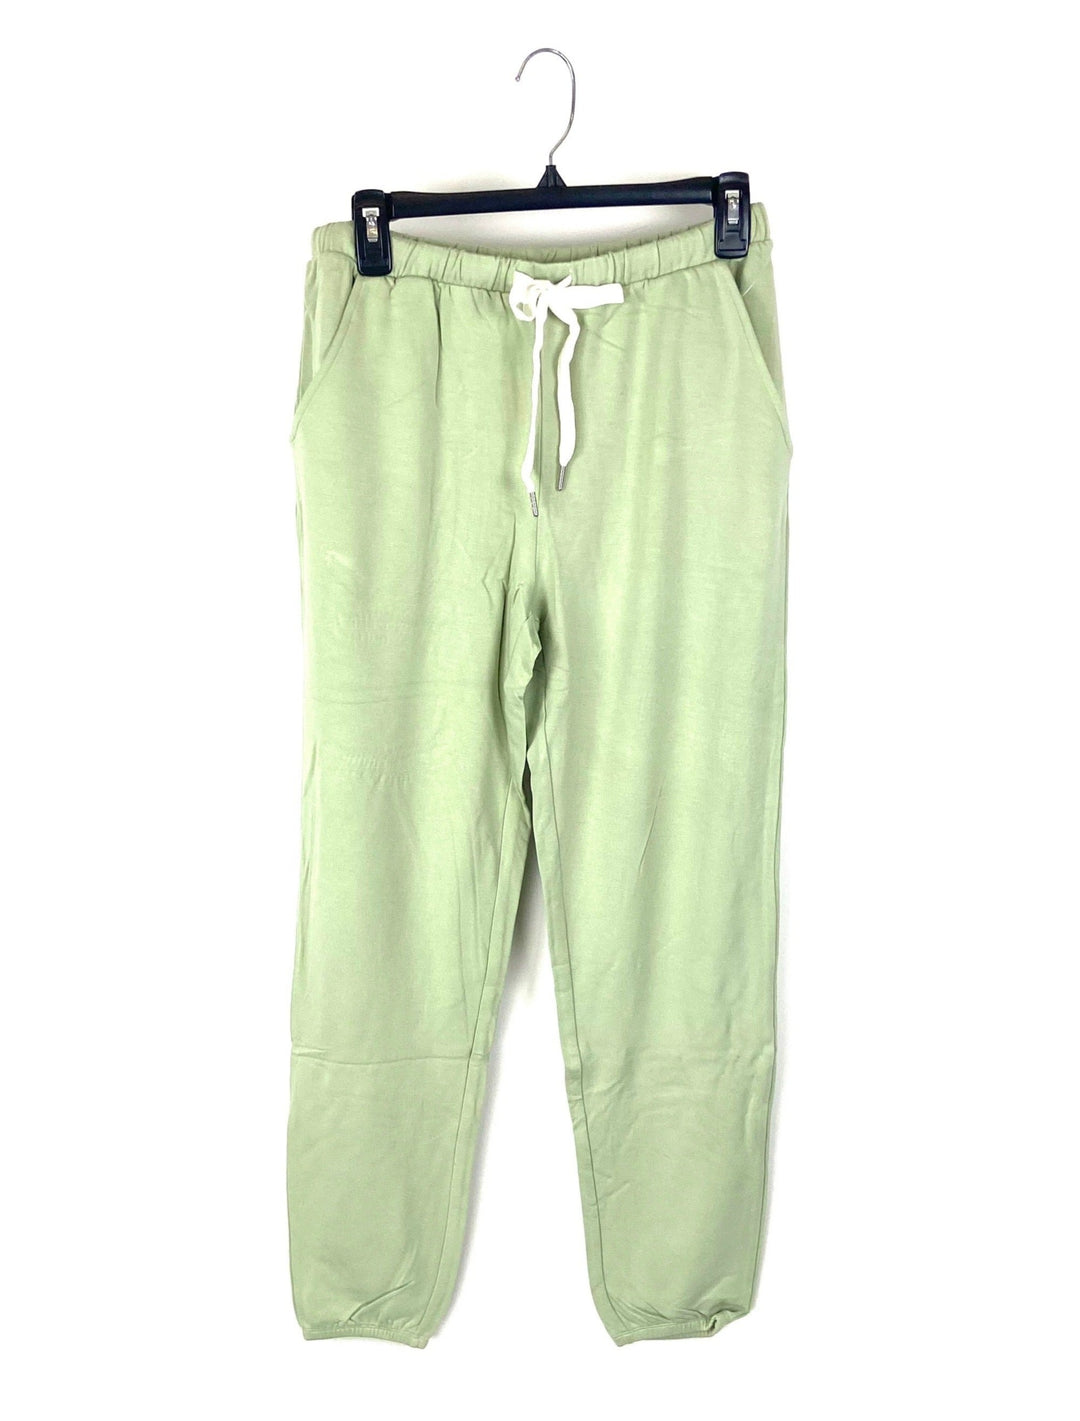 Green Joggers - Small